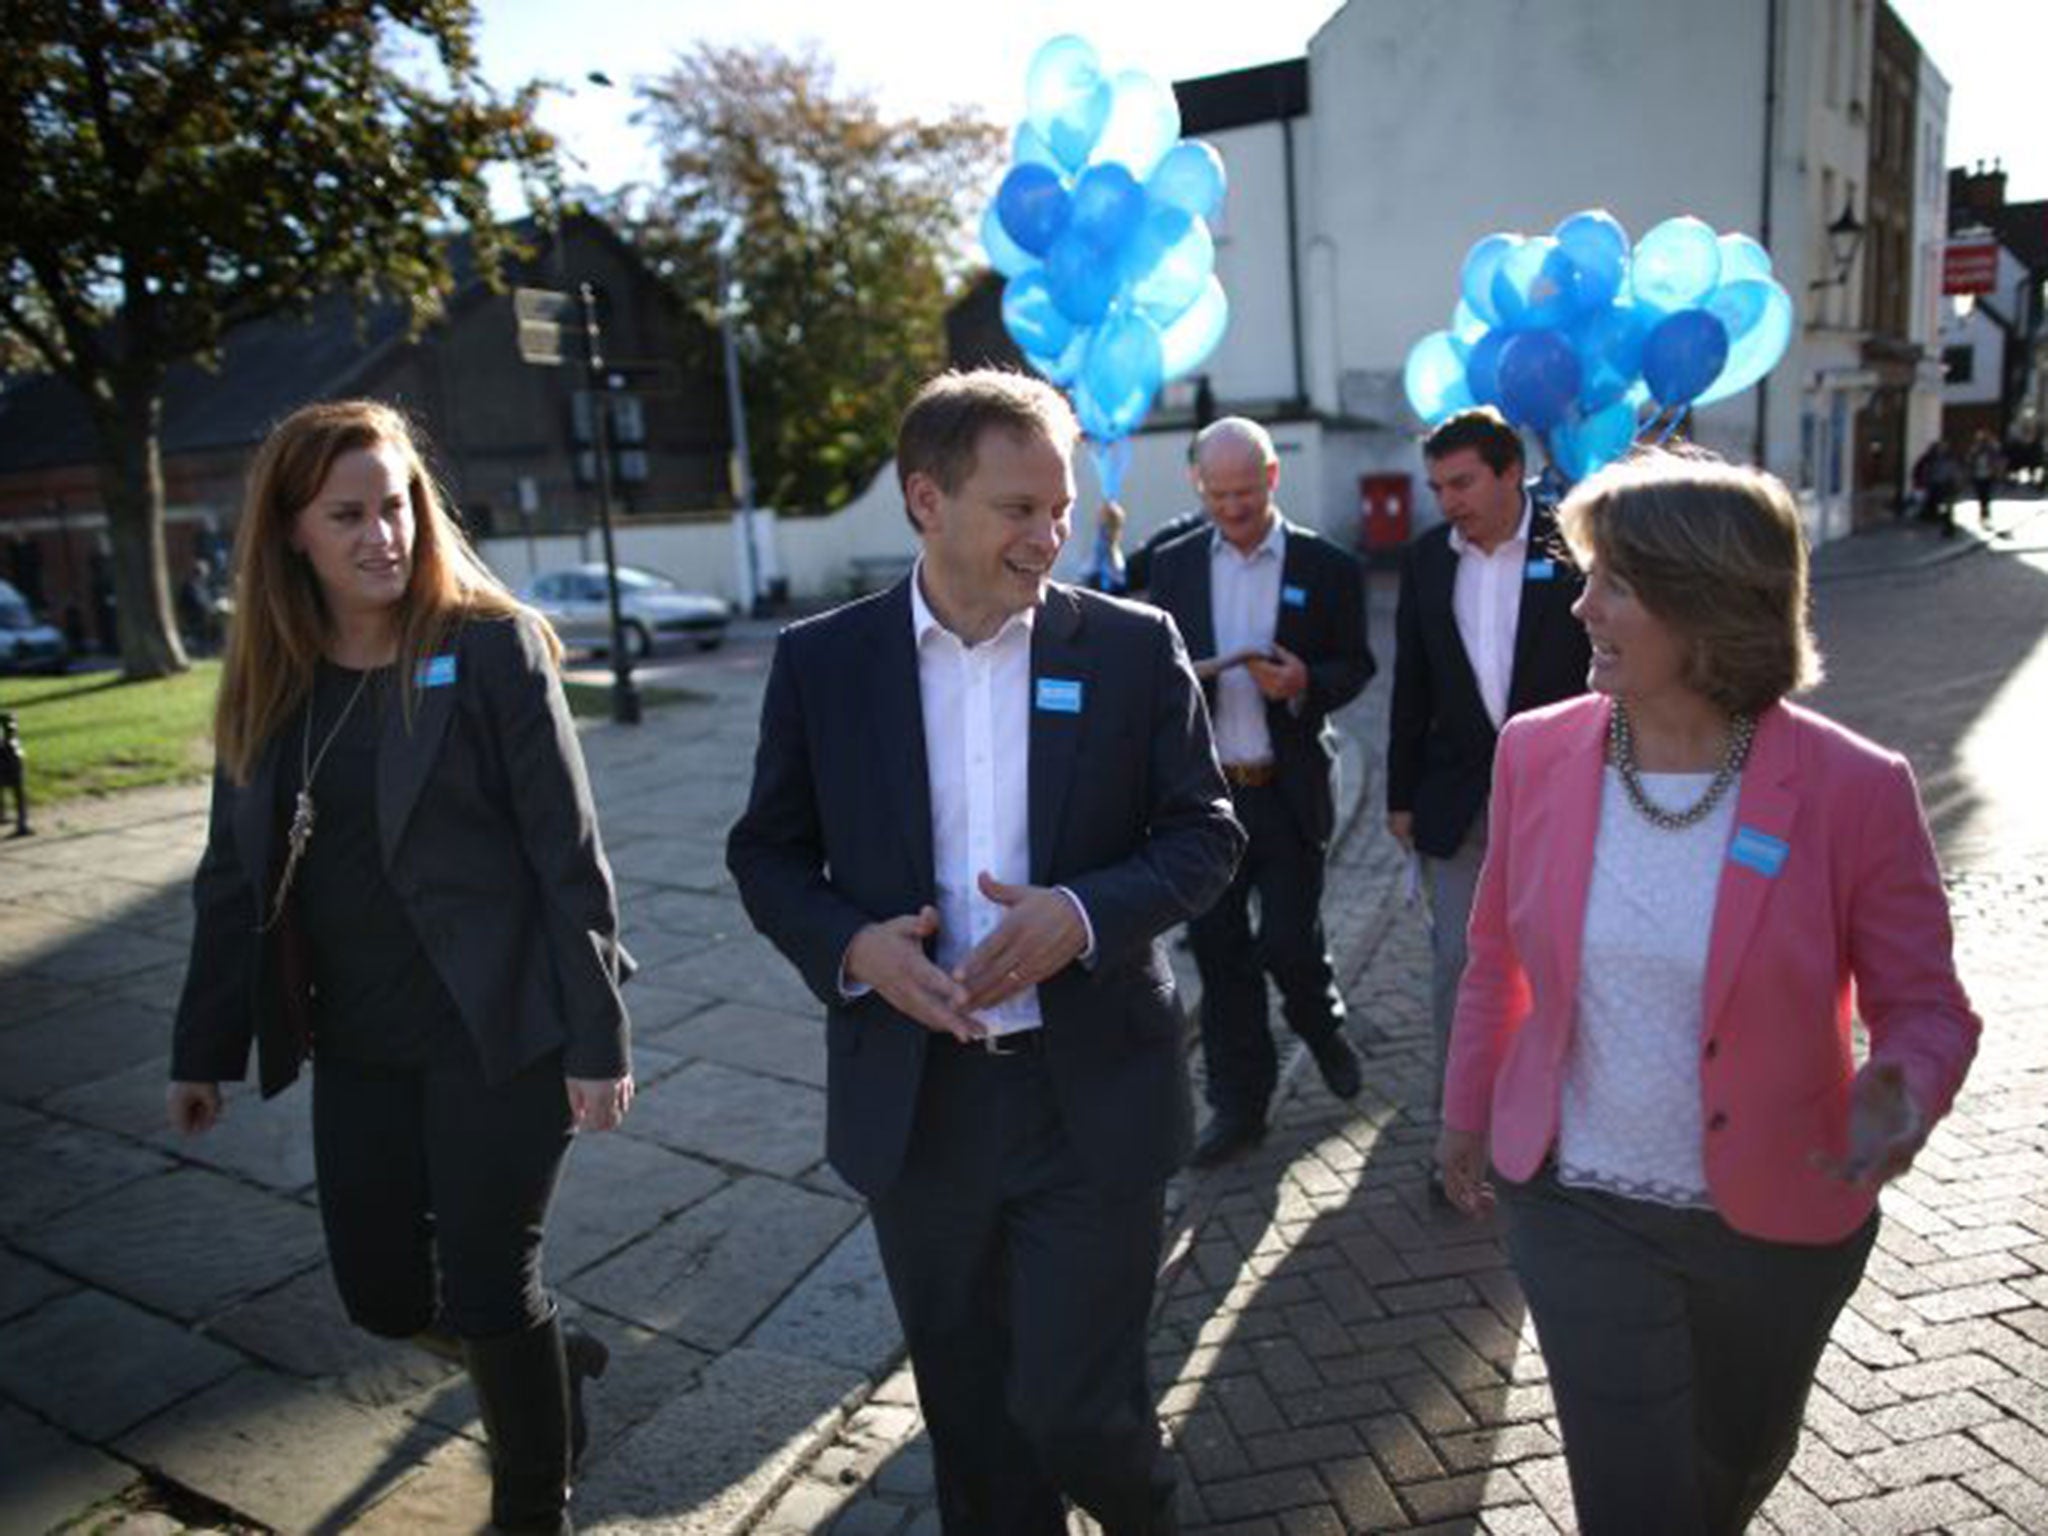 Tory party chairman Grant Shapps campaigns with candidate Kelly Tolhurst, left, and party activists in Rochester